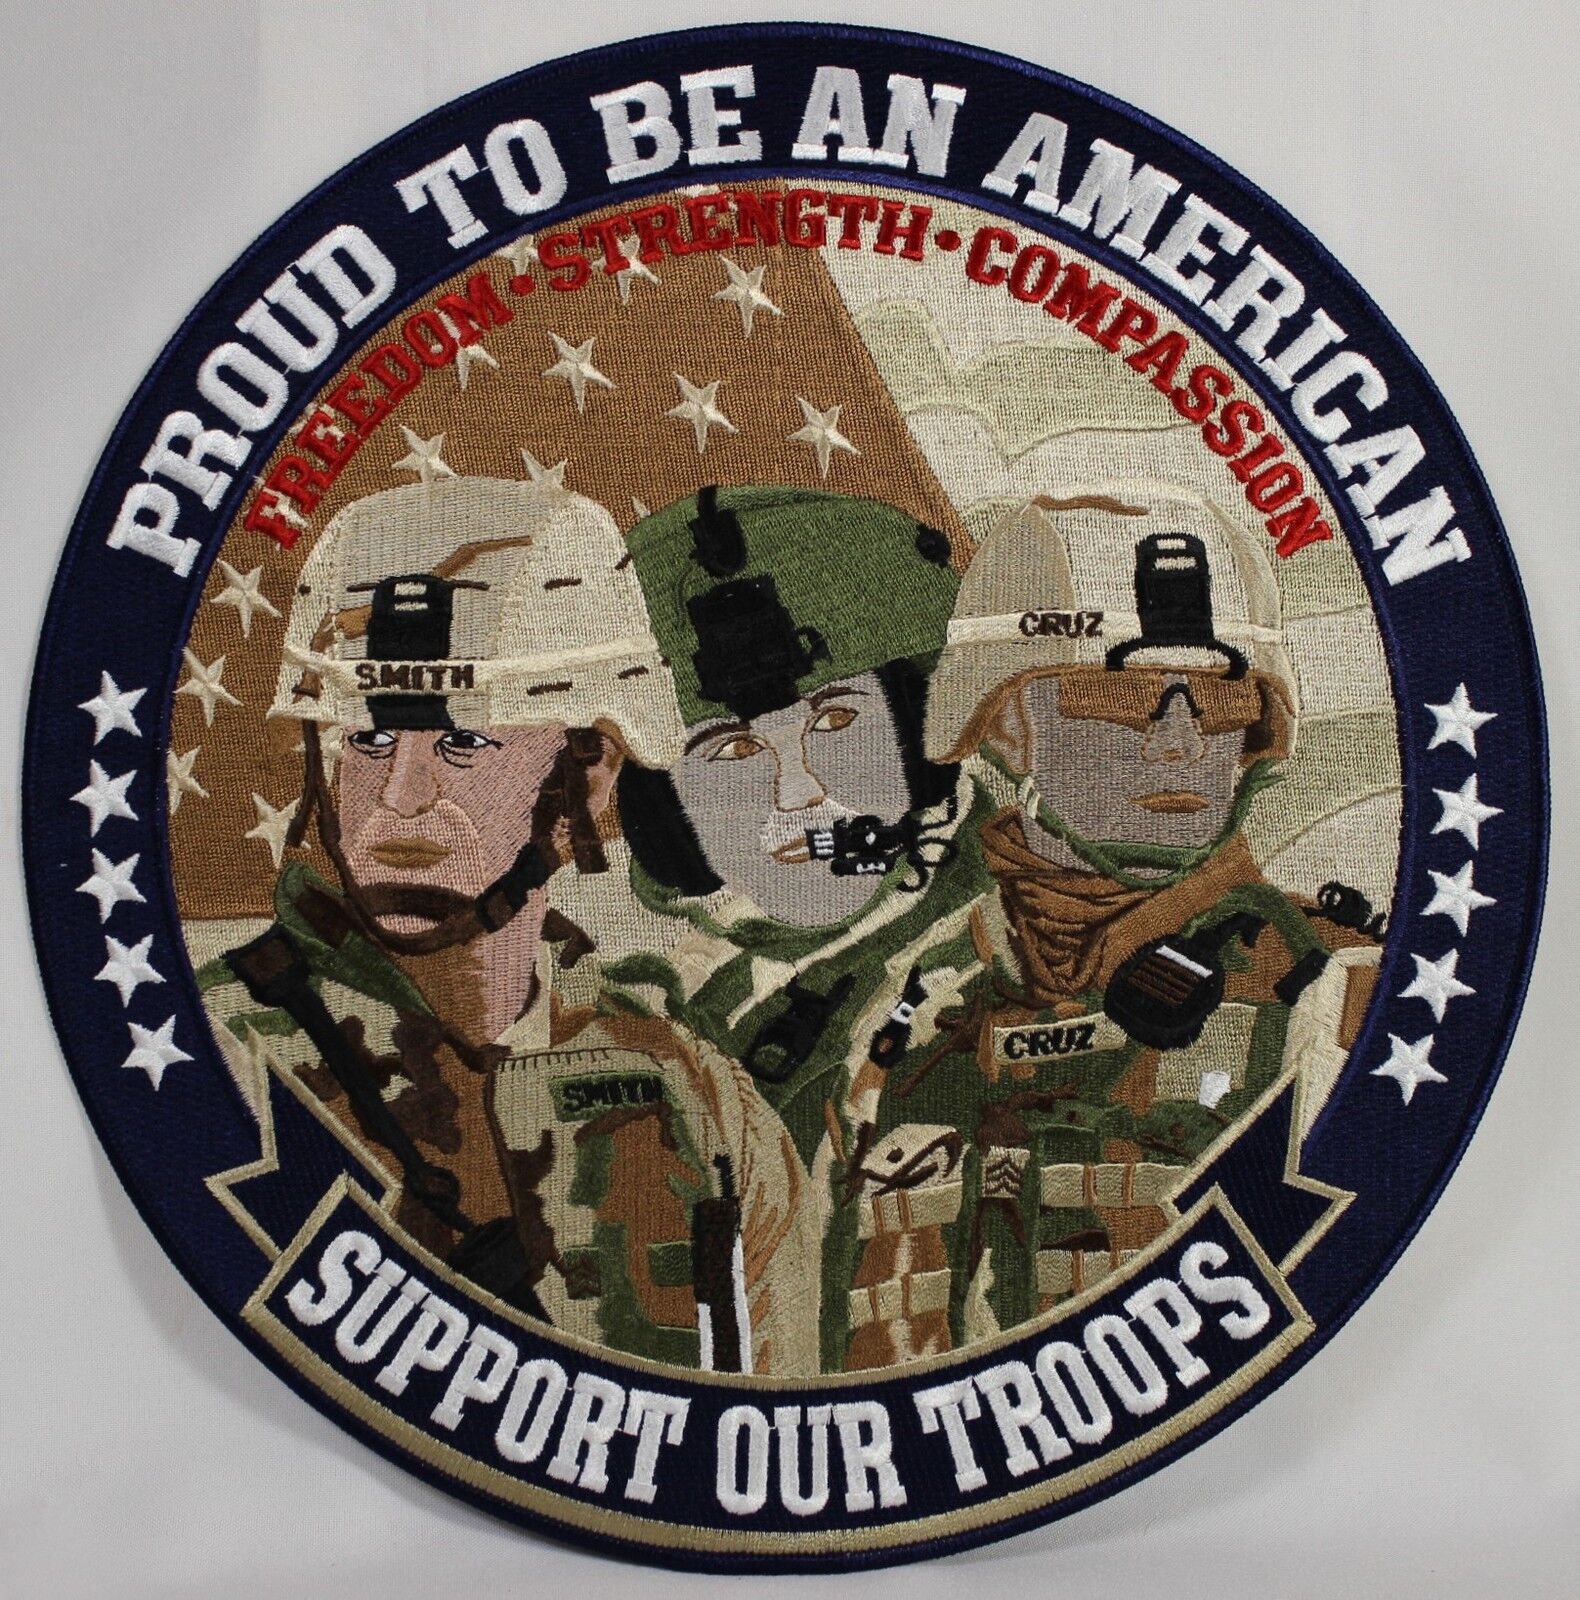 Proud to be an American--Support Our Troops 12